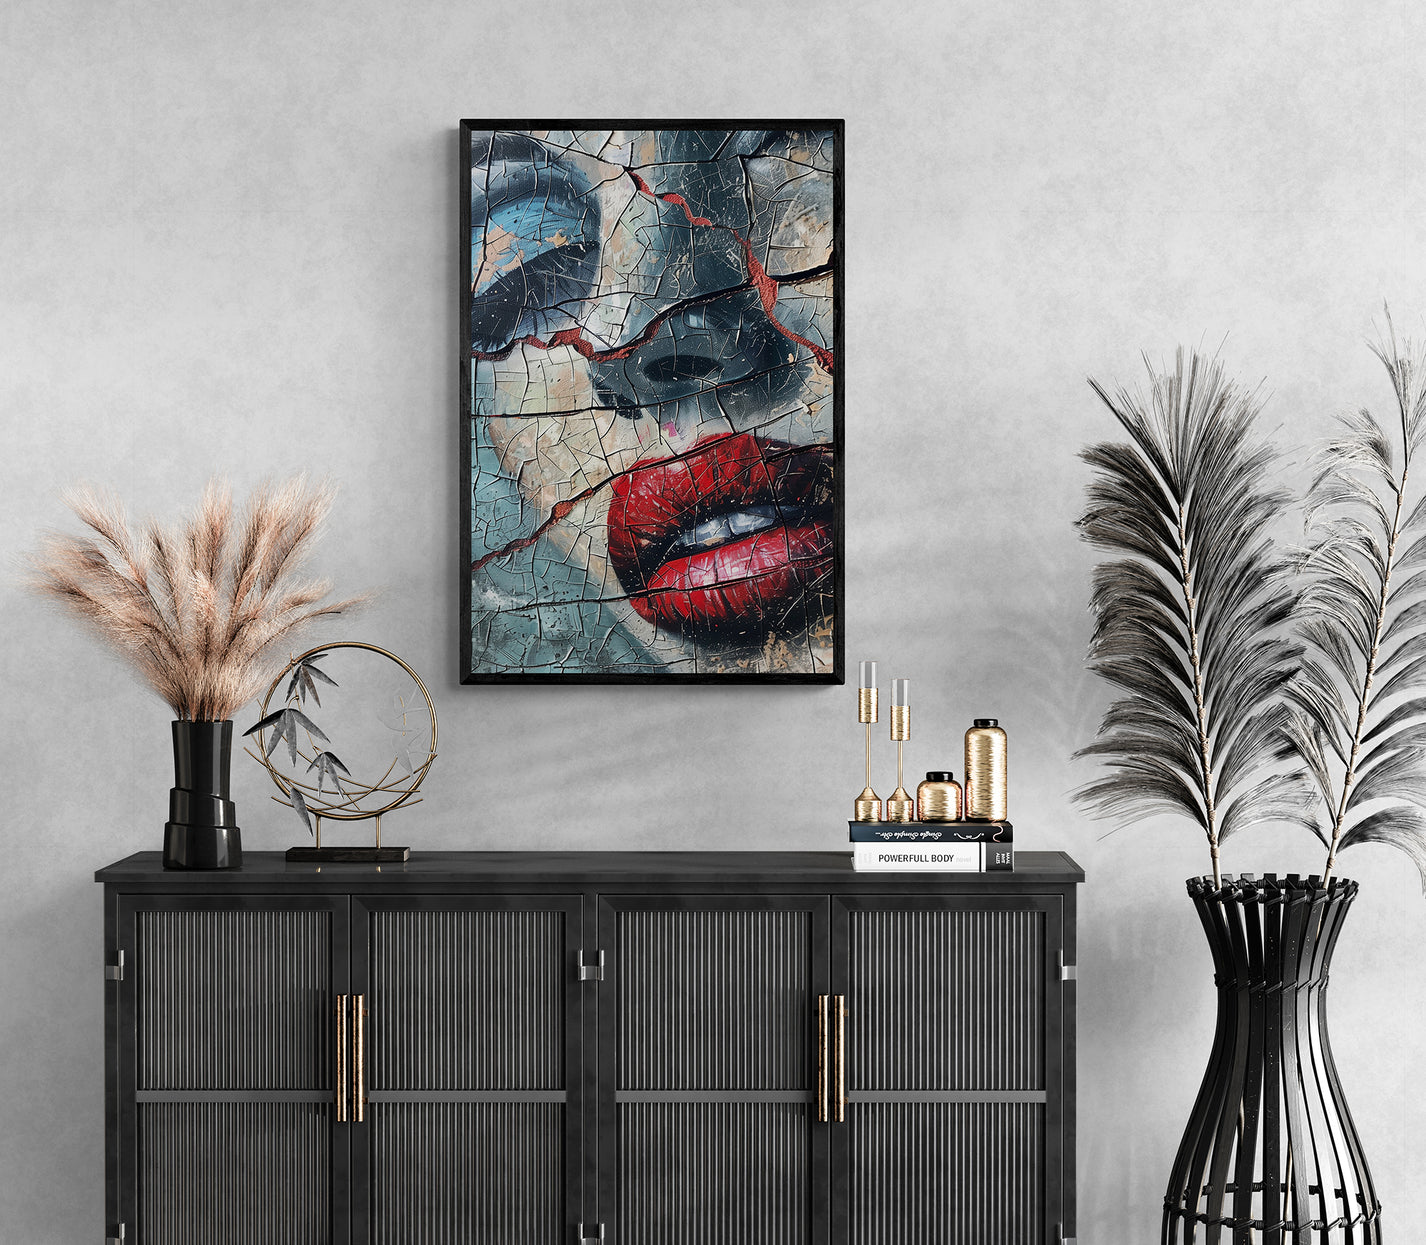 Elegant framed canvas print featuring a textured portrait with vibrant red lips by Milton Wes Art, enhancing the modern room decor and available for purchase